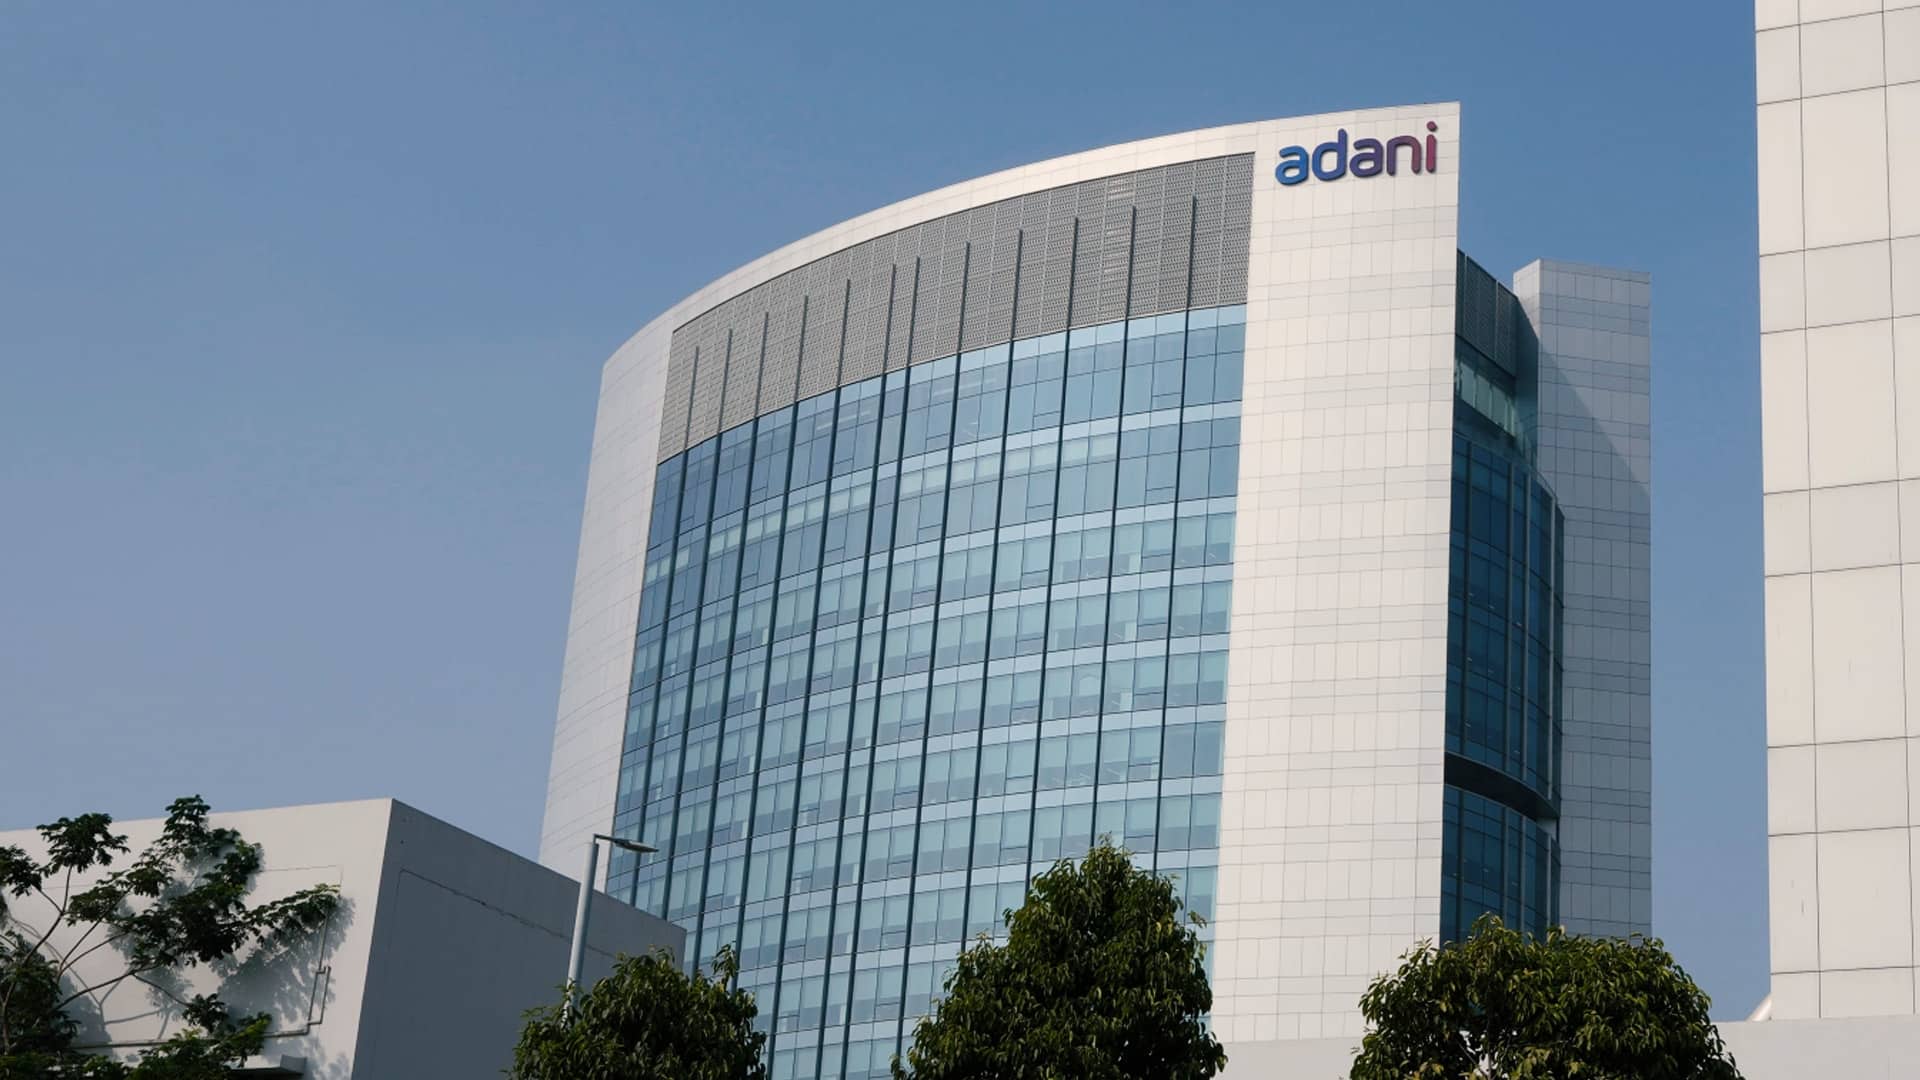 Seven Adani stocks faced regulatory surveillance since 2019 for price rise and fall, other issues: Market data